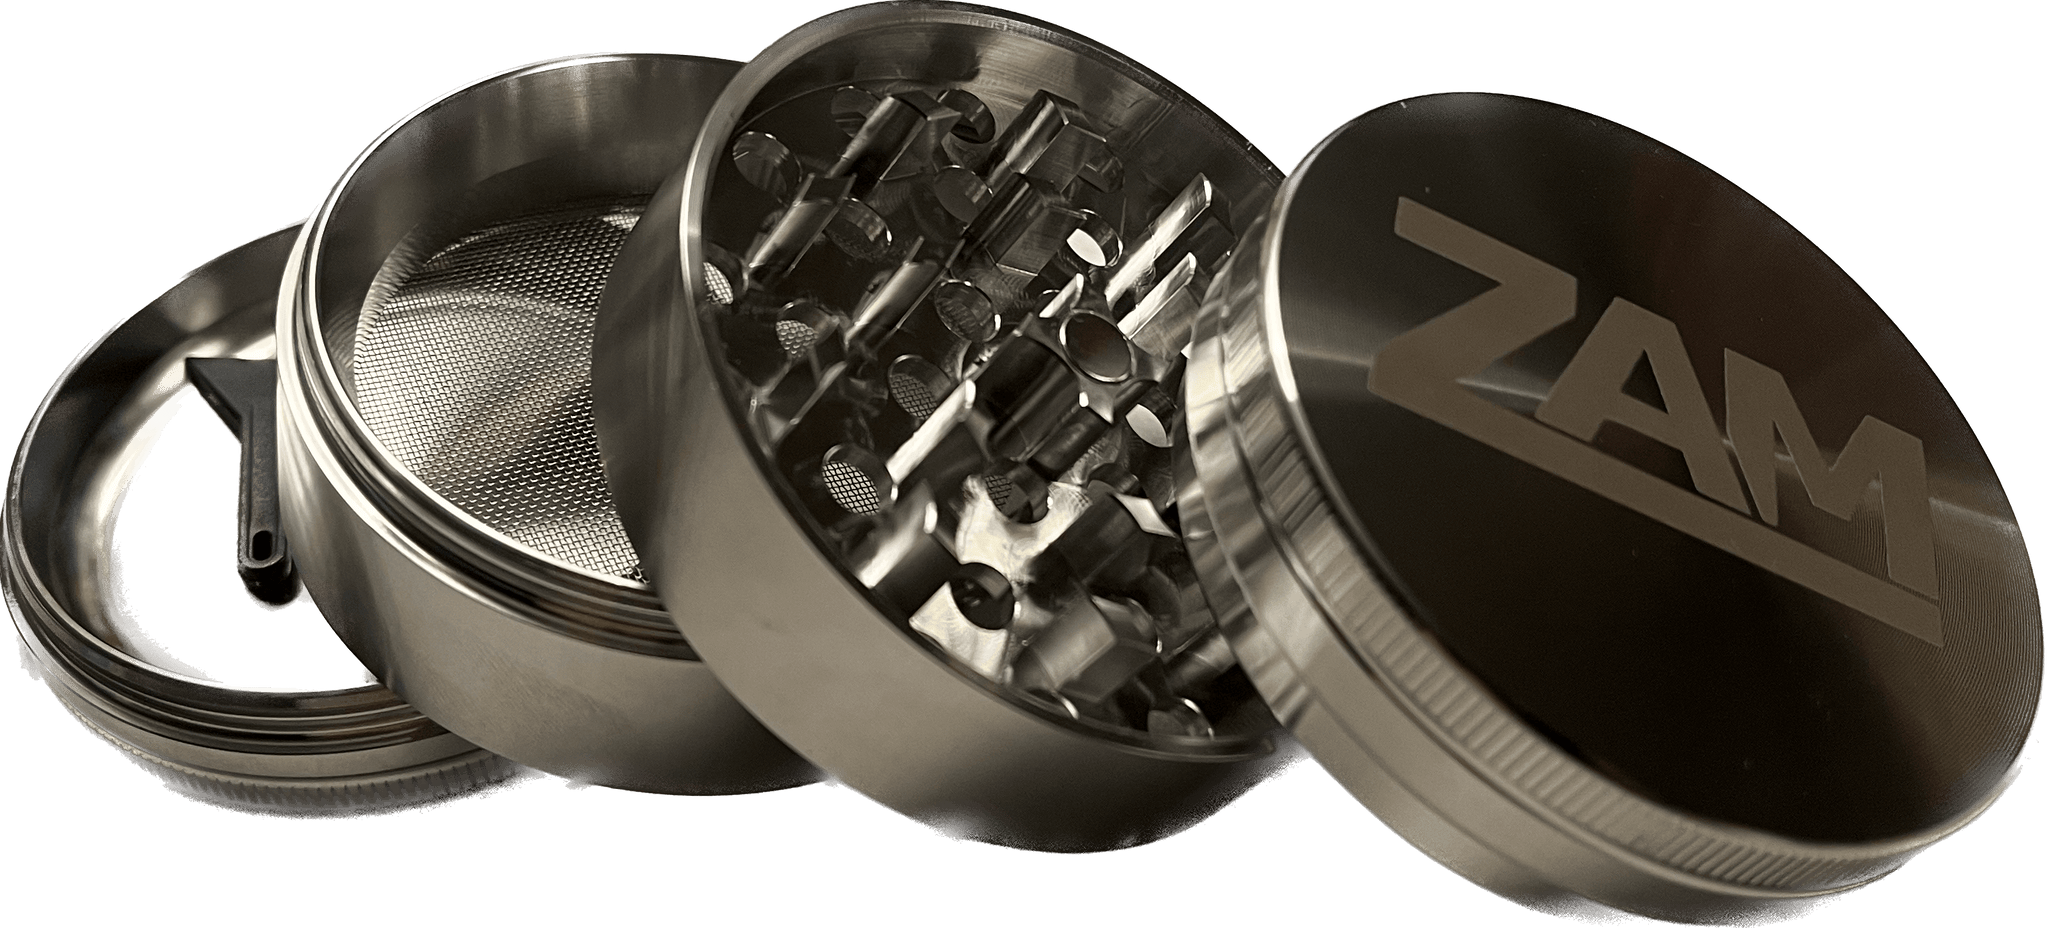 Weed Grinder Screen Sizes Explained – ZAM Grinders